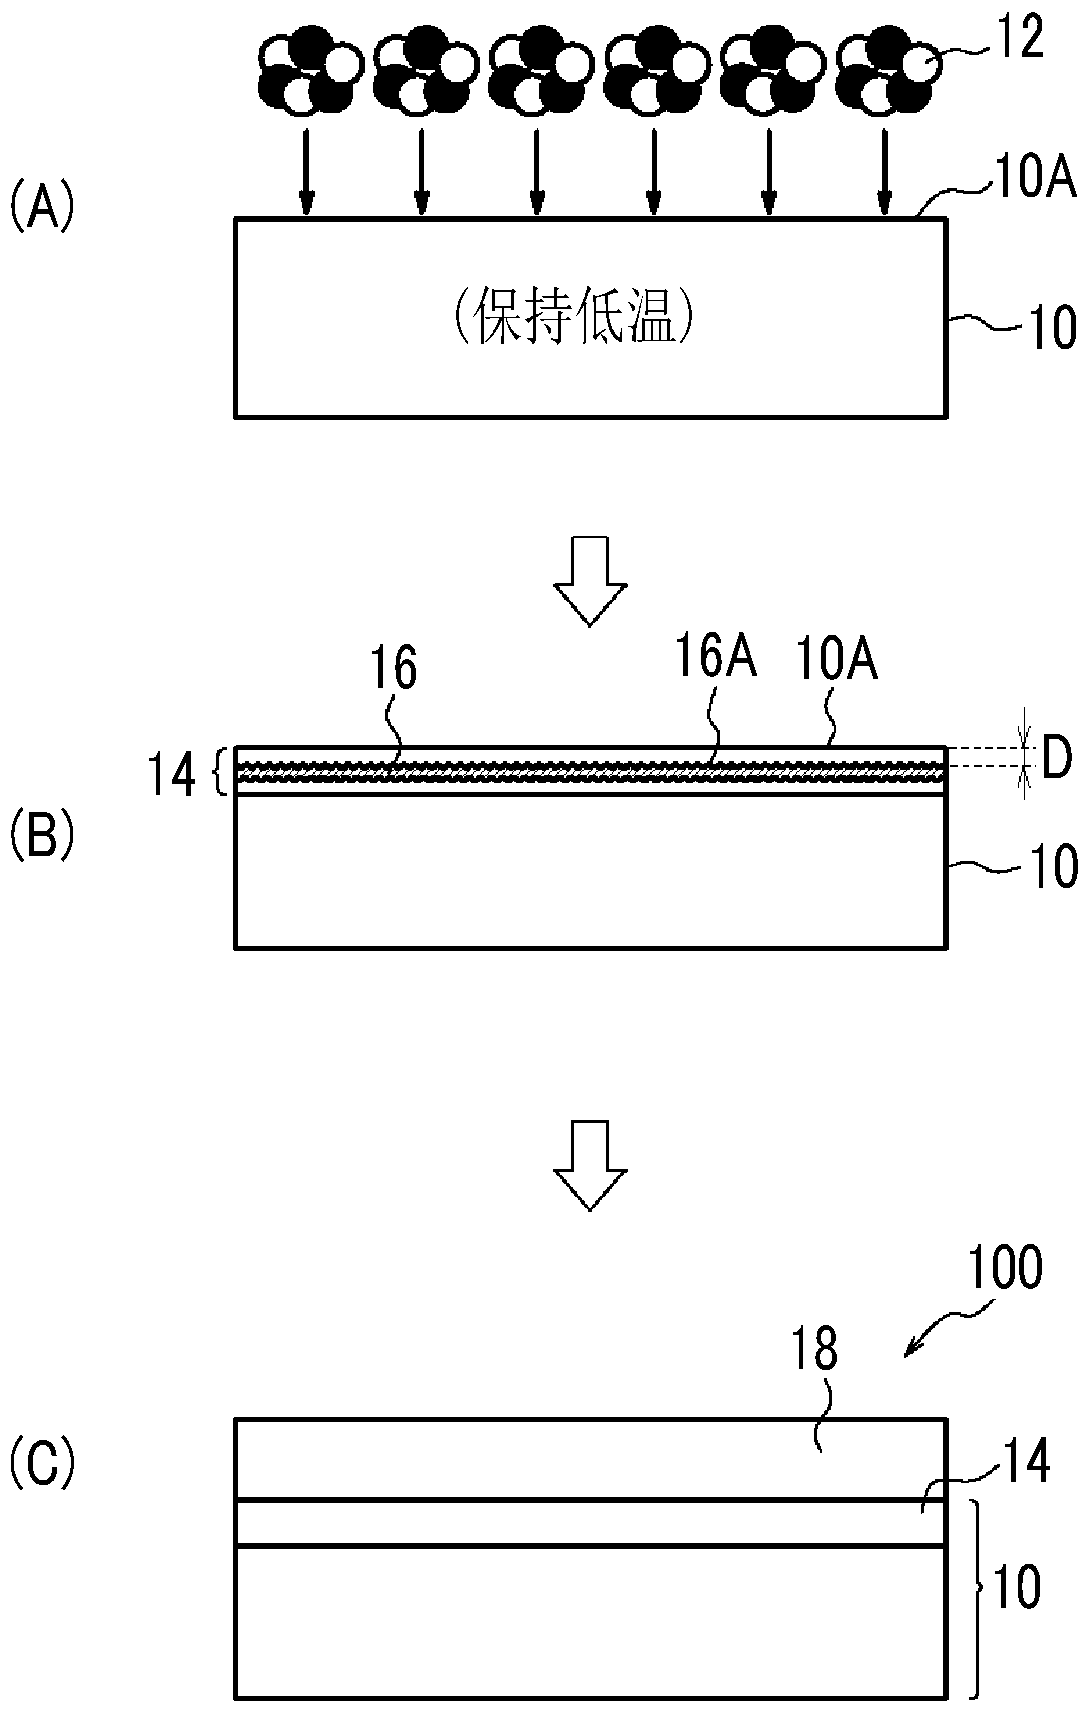 Method for manufacturing semiconductor epitaxial wafer and method for manufacturing solid-state imaging device